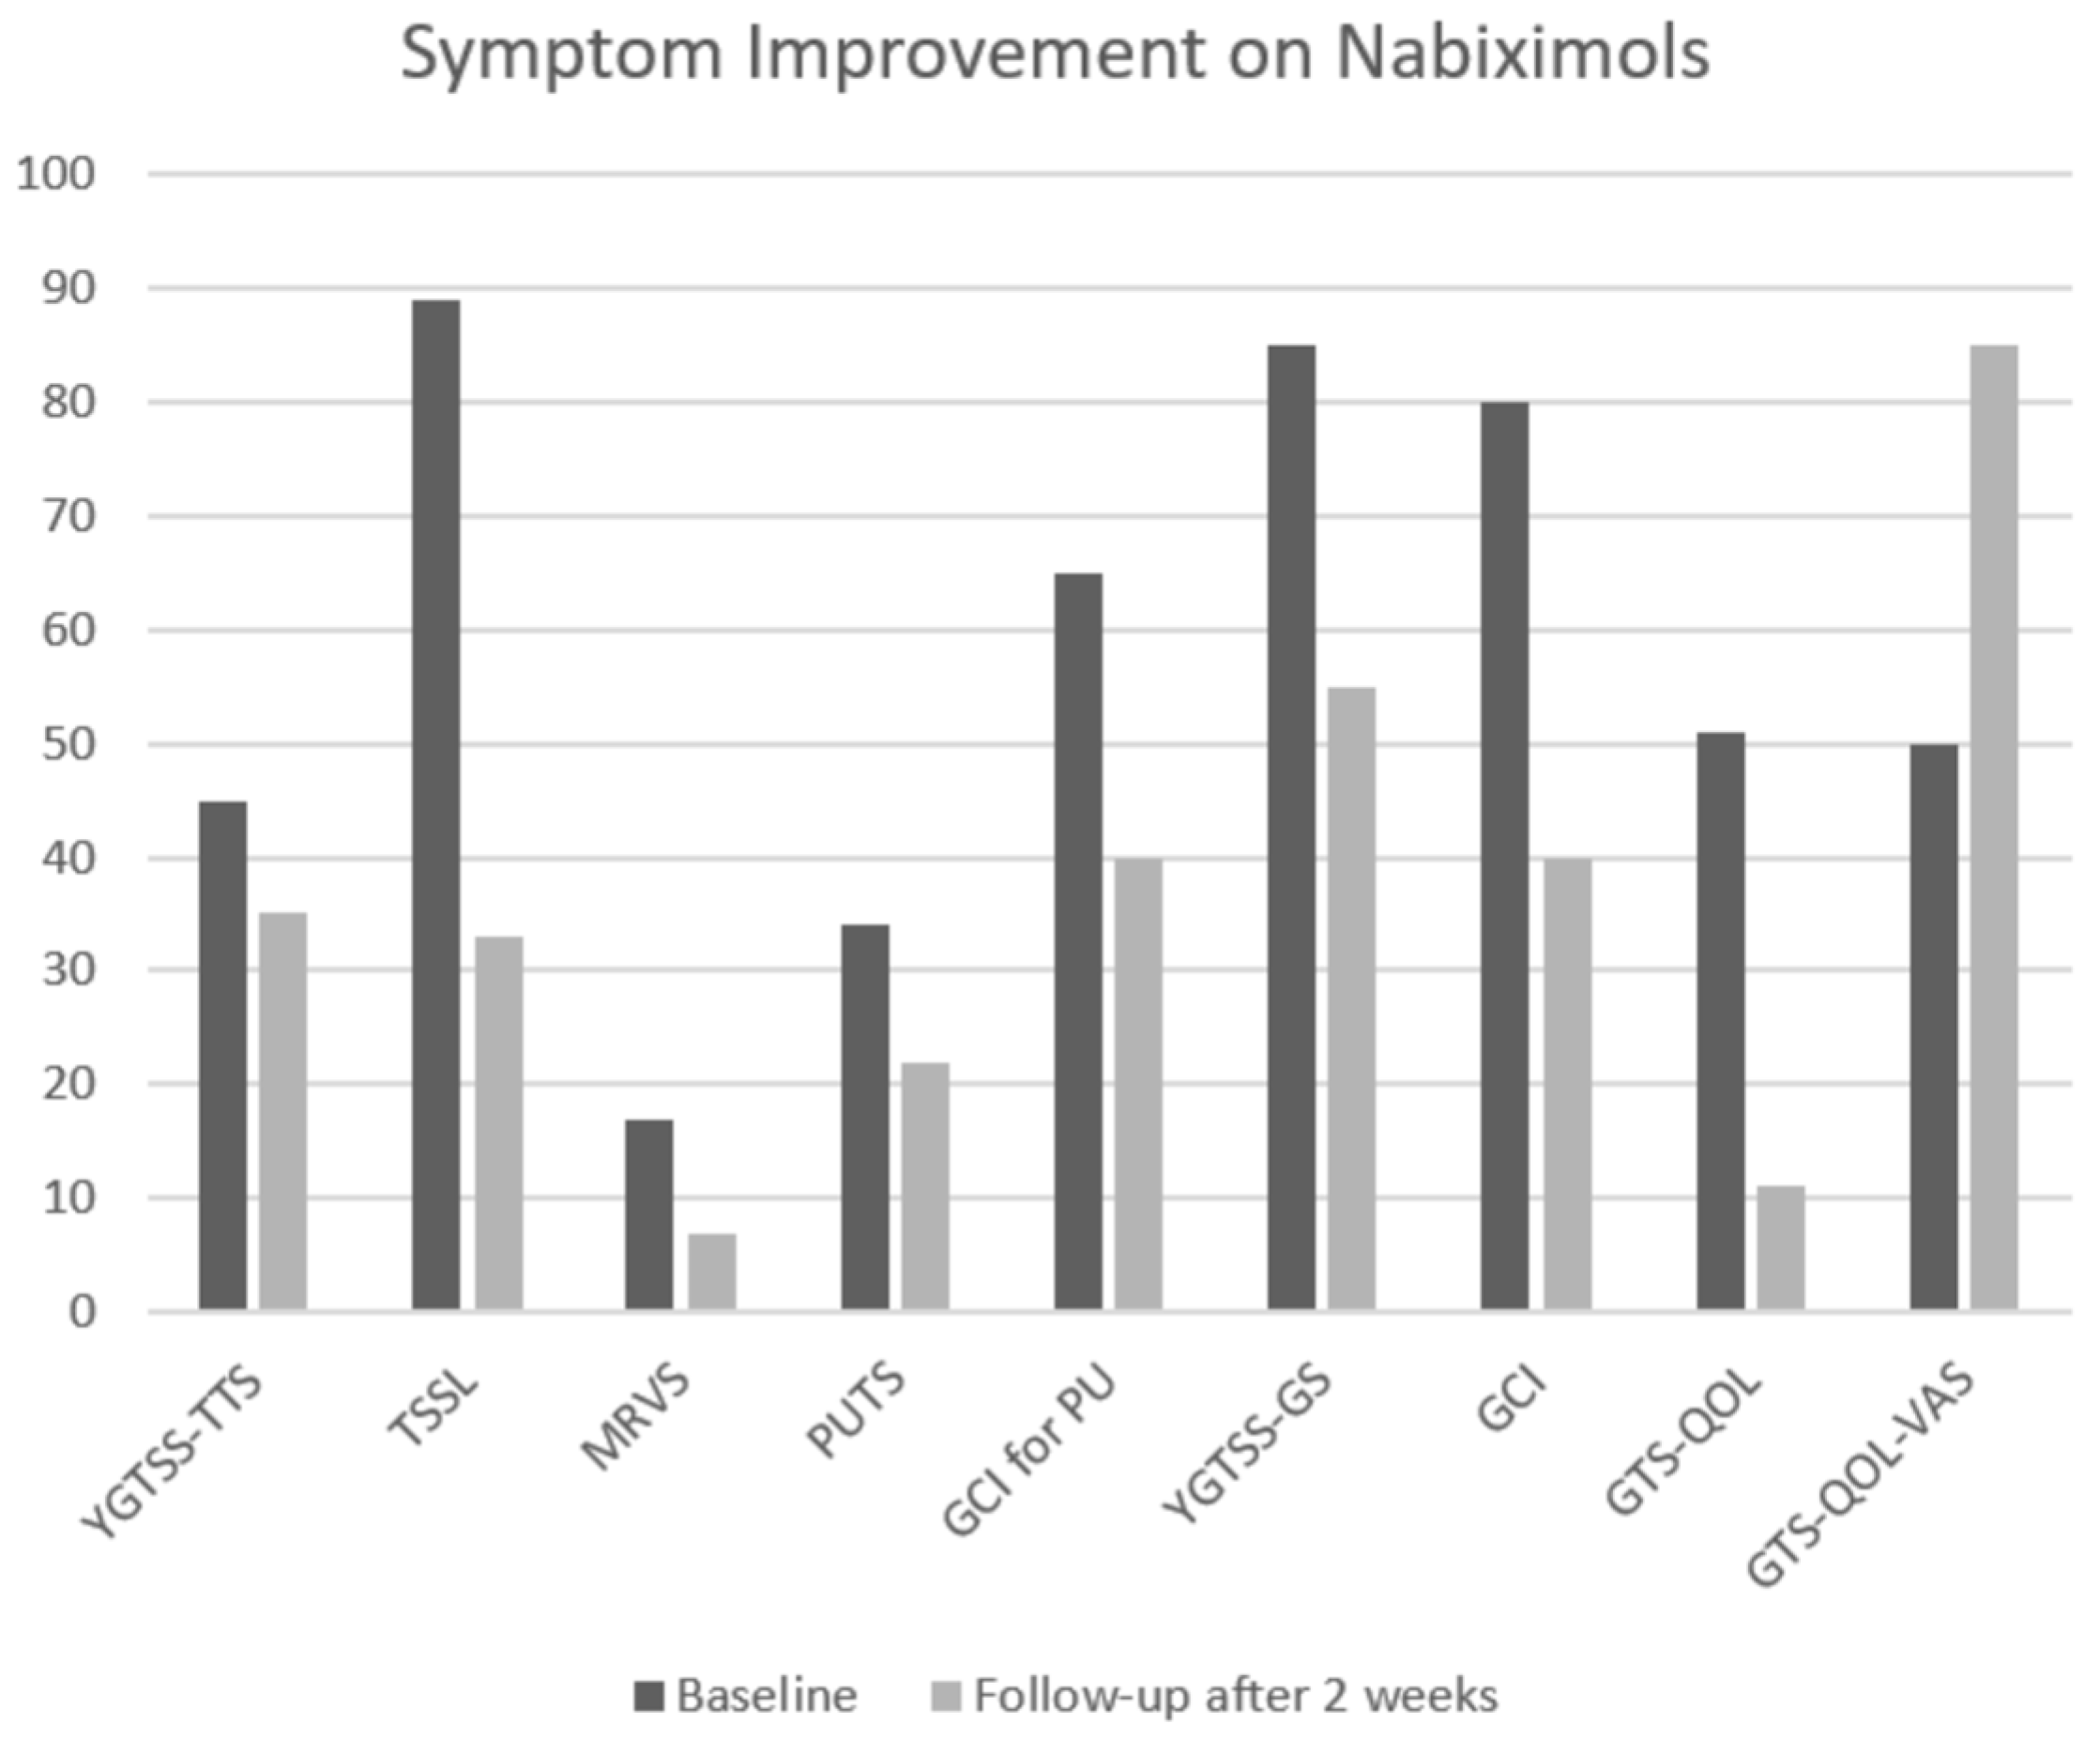 Brain Sciences Free Full Text Significant Tic Reduction In An Otherwise Treatment Resistant Patient With Gilles De La Tourette Syndrome Following Treatment With Nabiximols Html